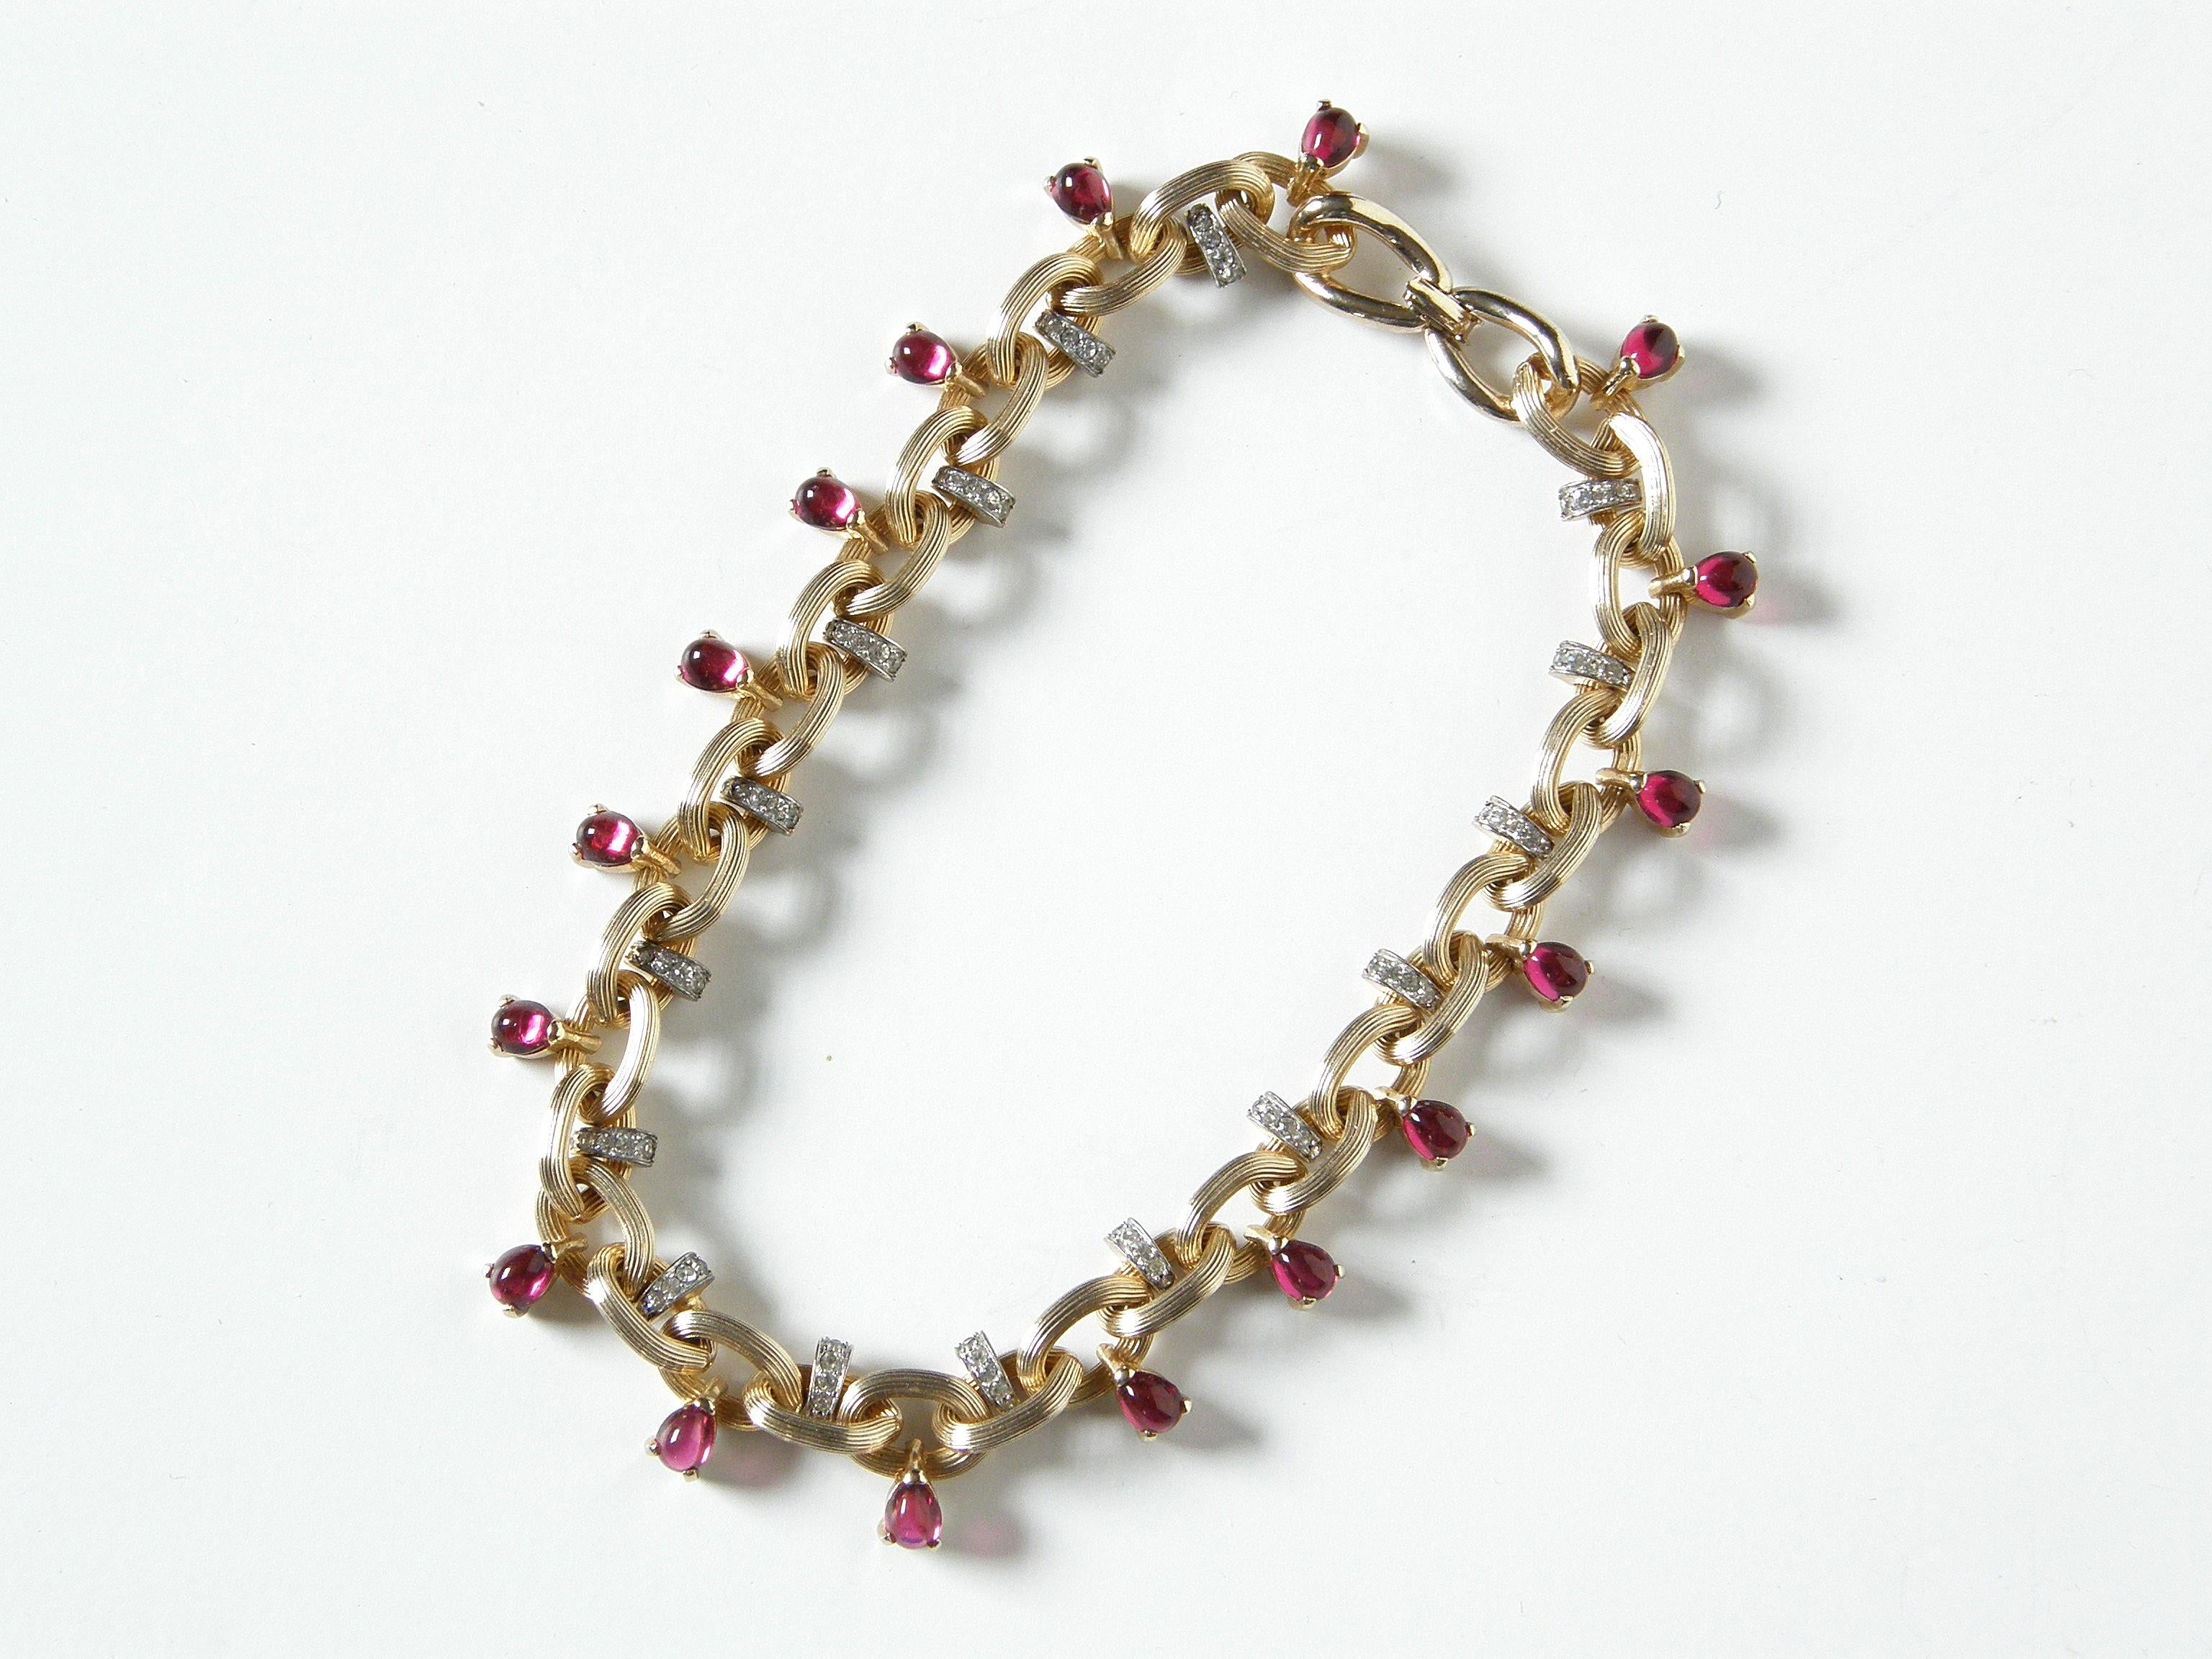 This 1950s choker necklace and matching earrings were designed by Marcel Boucher. They feature chunky, gold tone chains with a ridged texture. Alternating links of the necklace are set with either a small band of faux diamond rhinestones or a pear